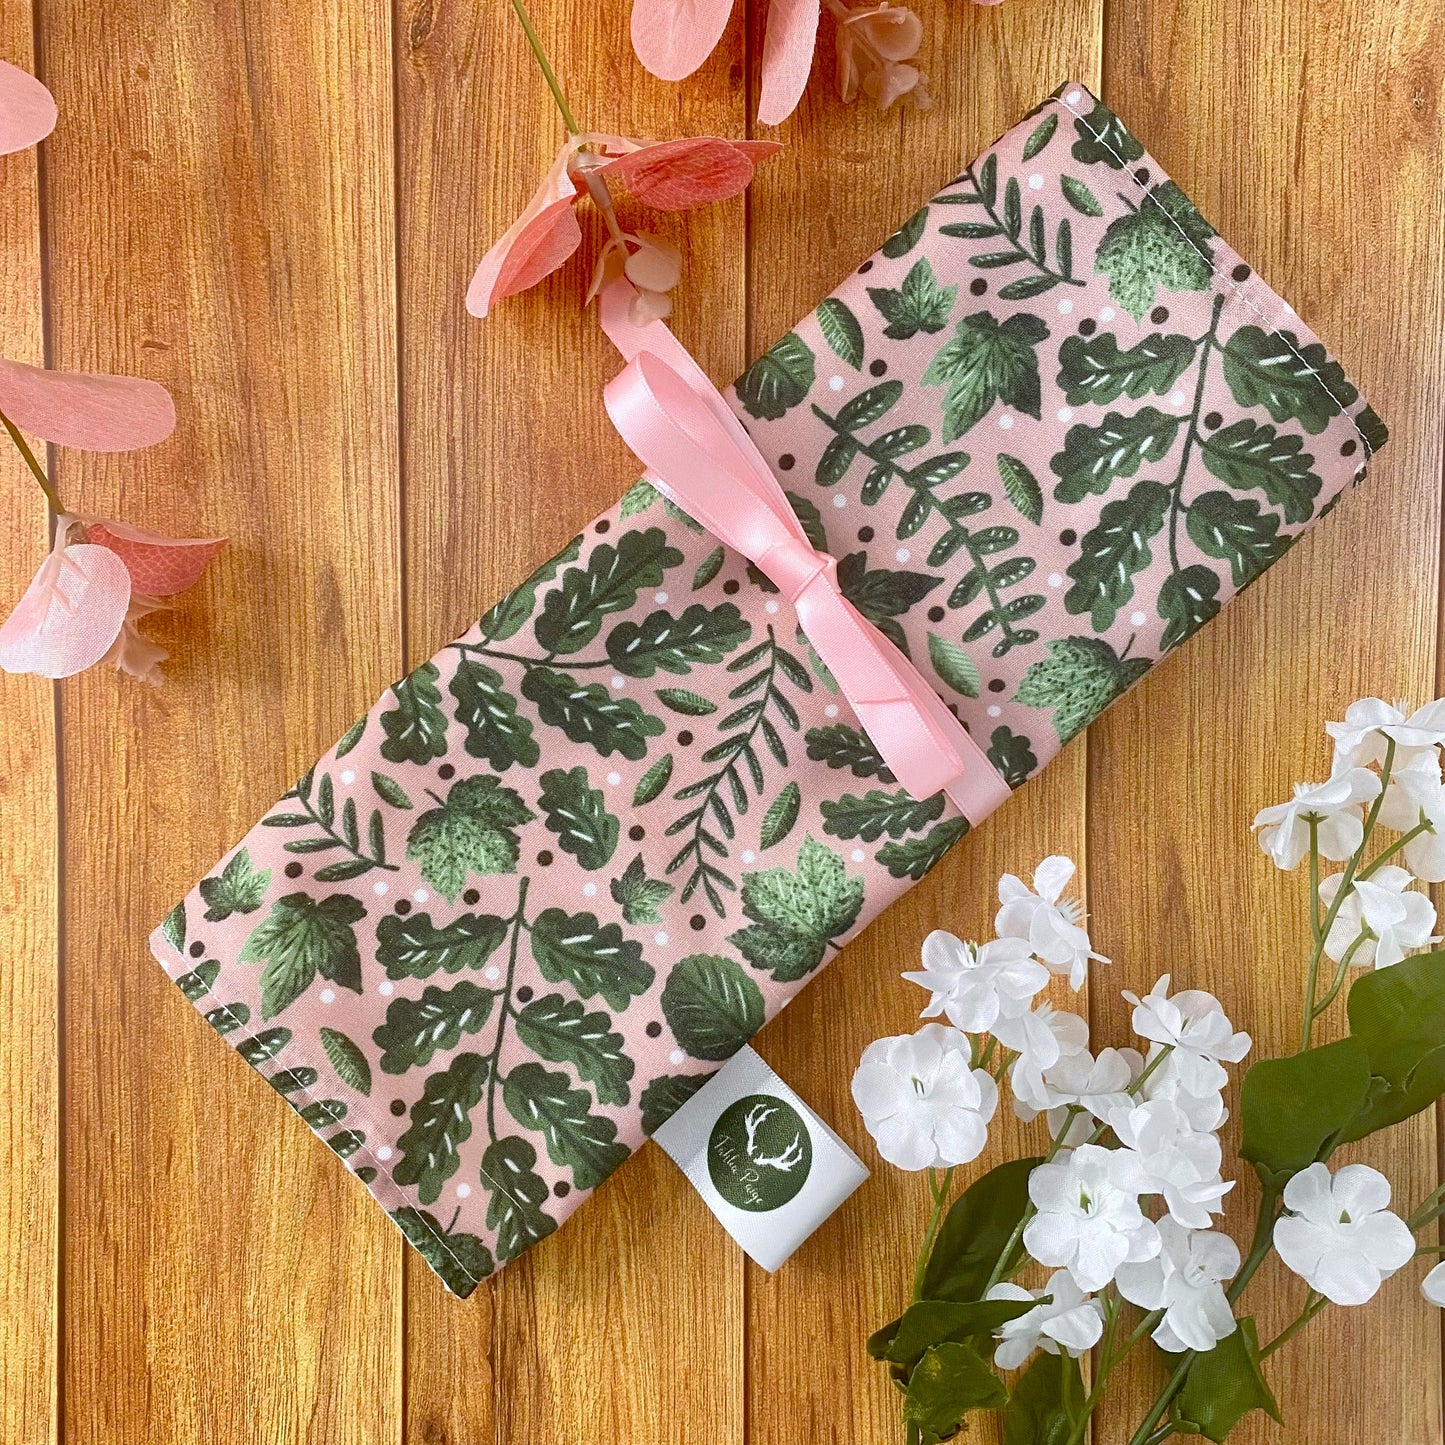 our makeup bag that opens flat to add makeup brushes in is a perfect gift for a nature lover, with a pink ribbon to keep it closed.